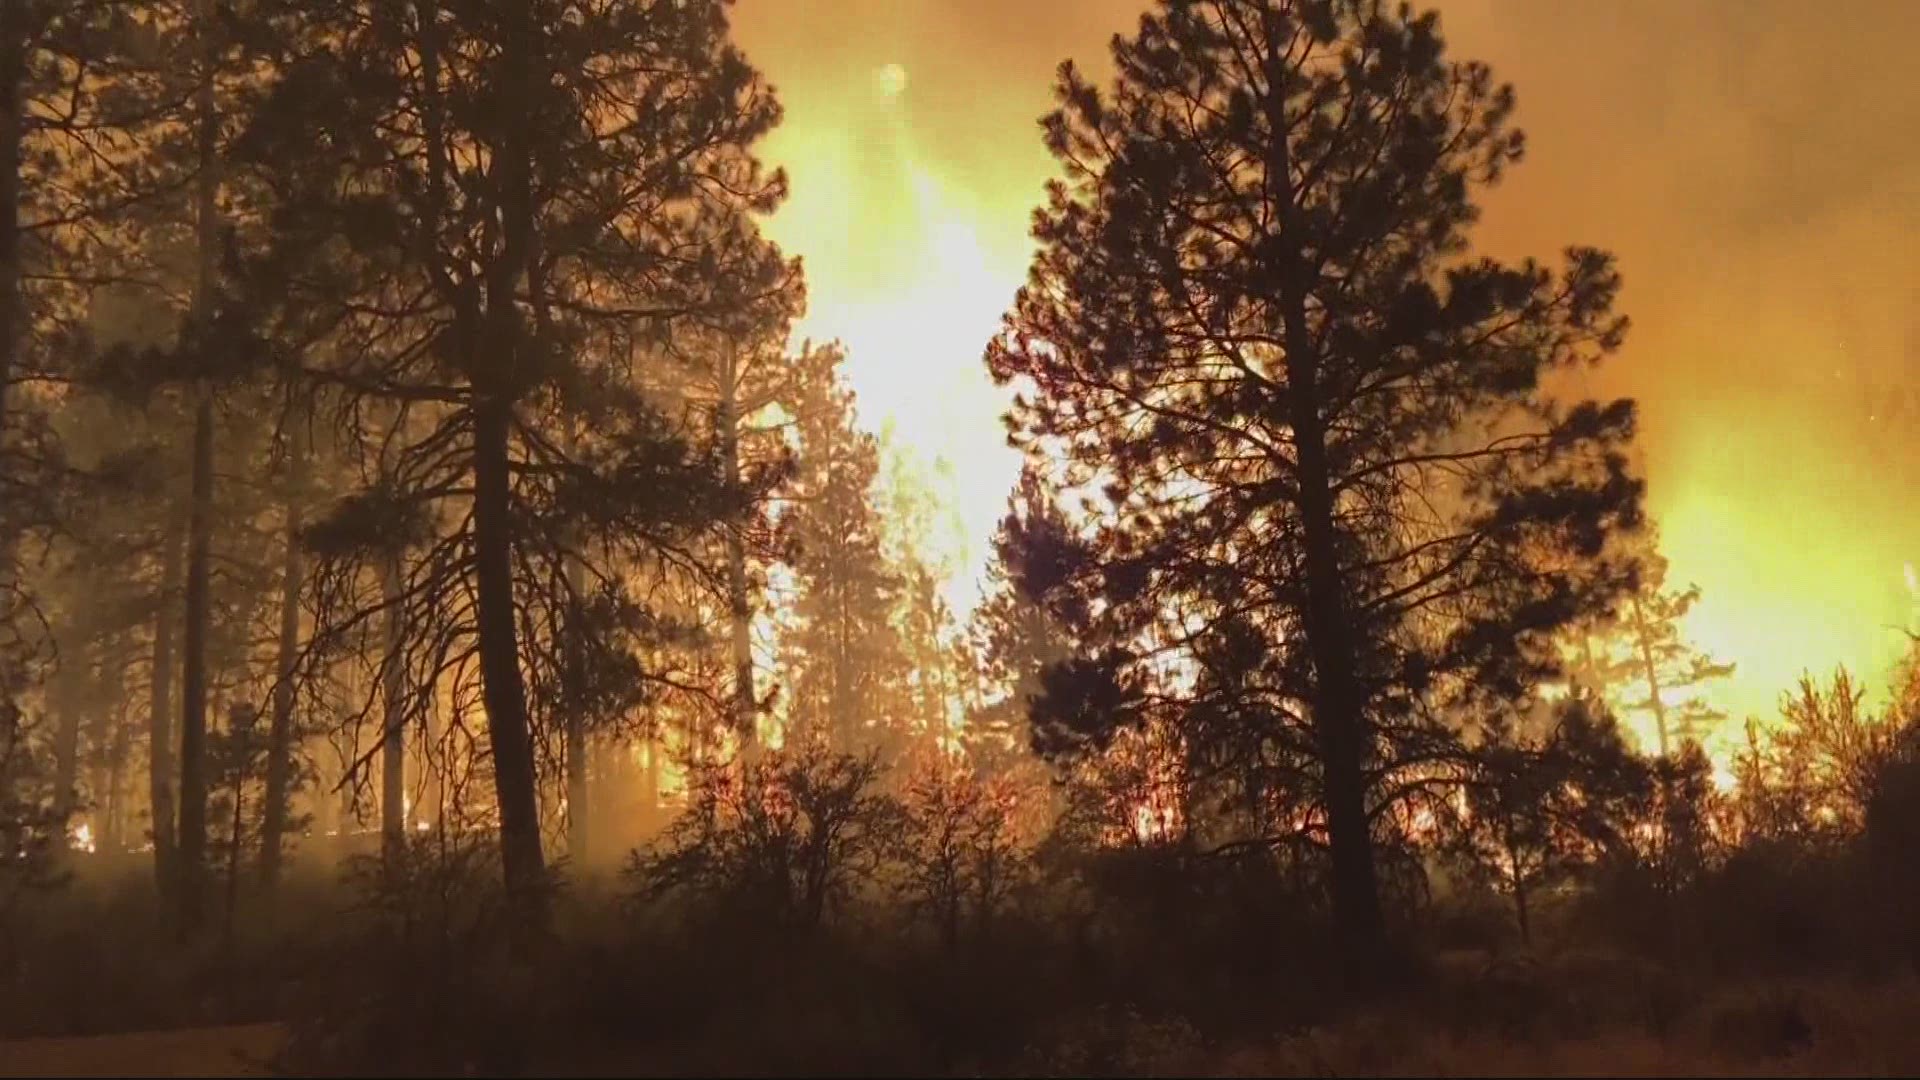 The Bootleg Fire, the nation’s largest, is one of 9 major wildfires burning in Oregon. The governor spoke about the threat and how the state is dealing with it.